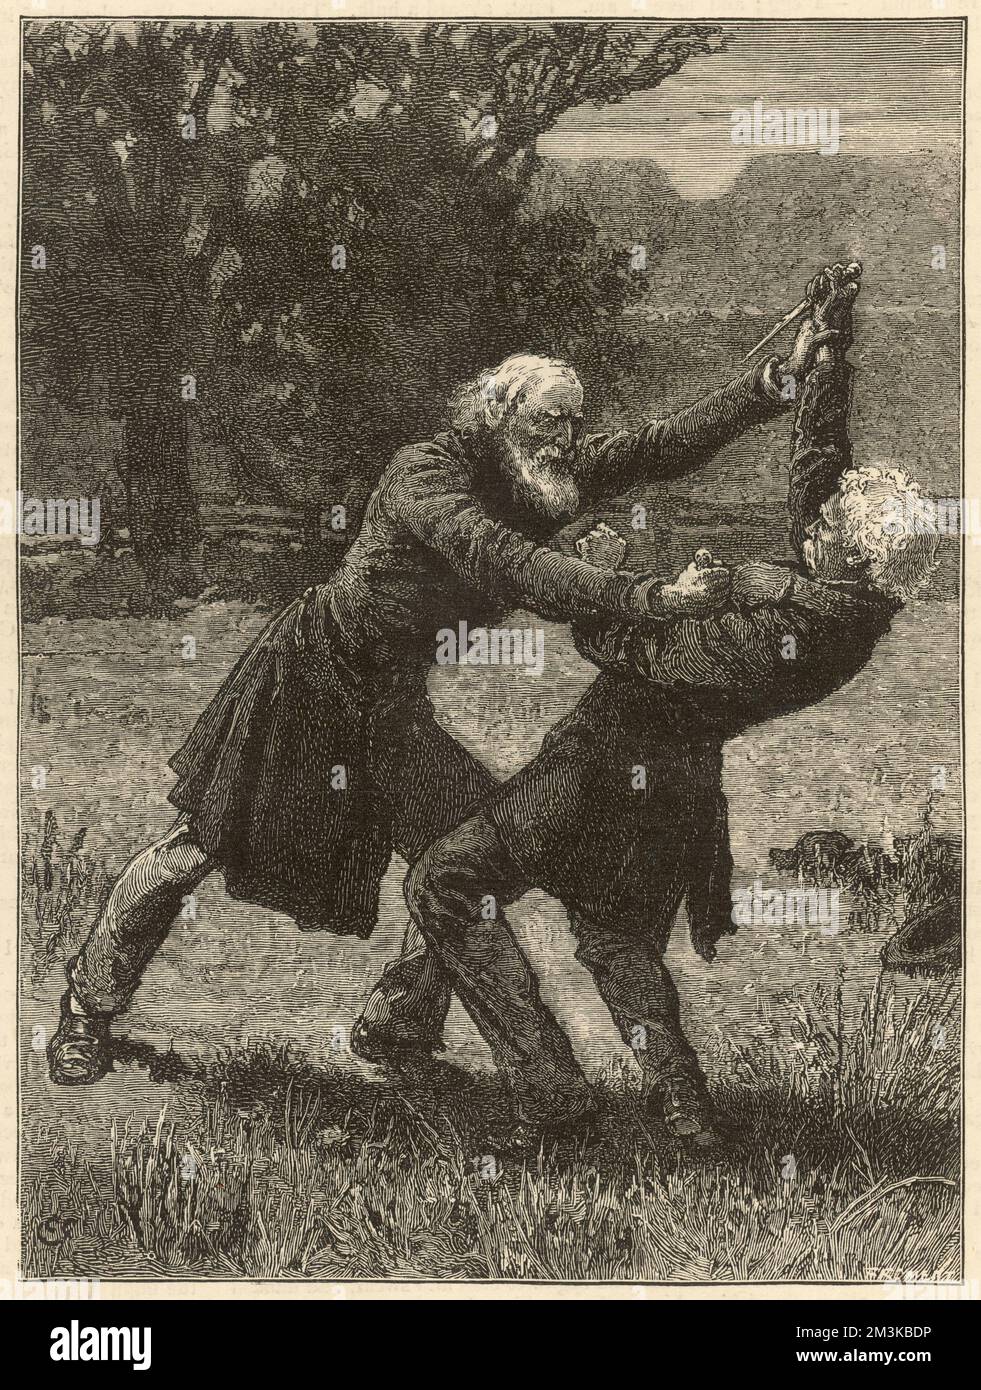 Two white-haired men, one clutching a knife, are locked in battle in the middle of a field,     Date: 23rd February 1878 Stock Photo